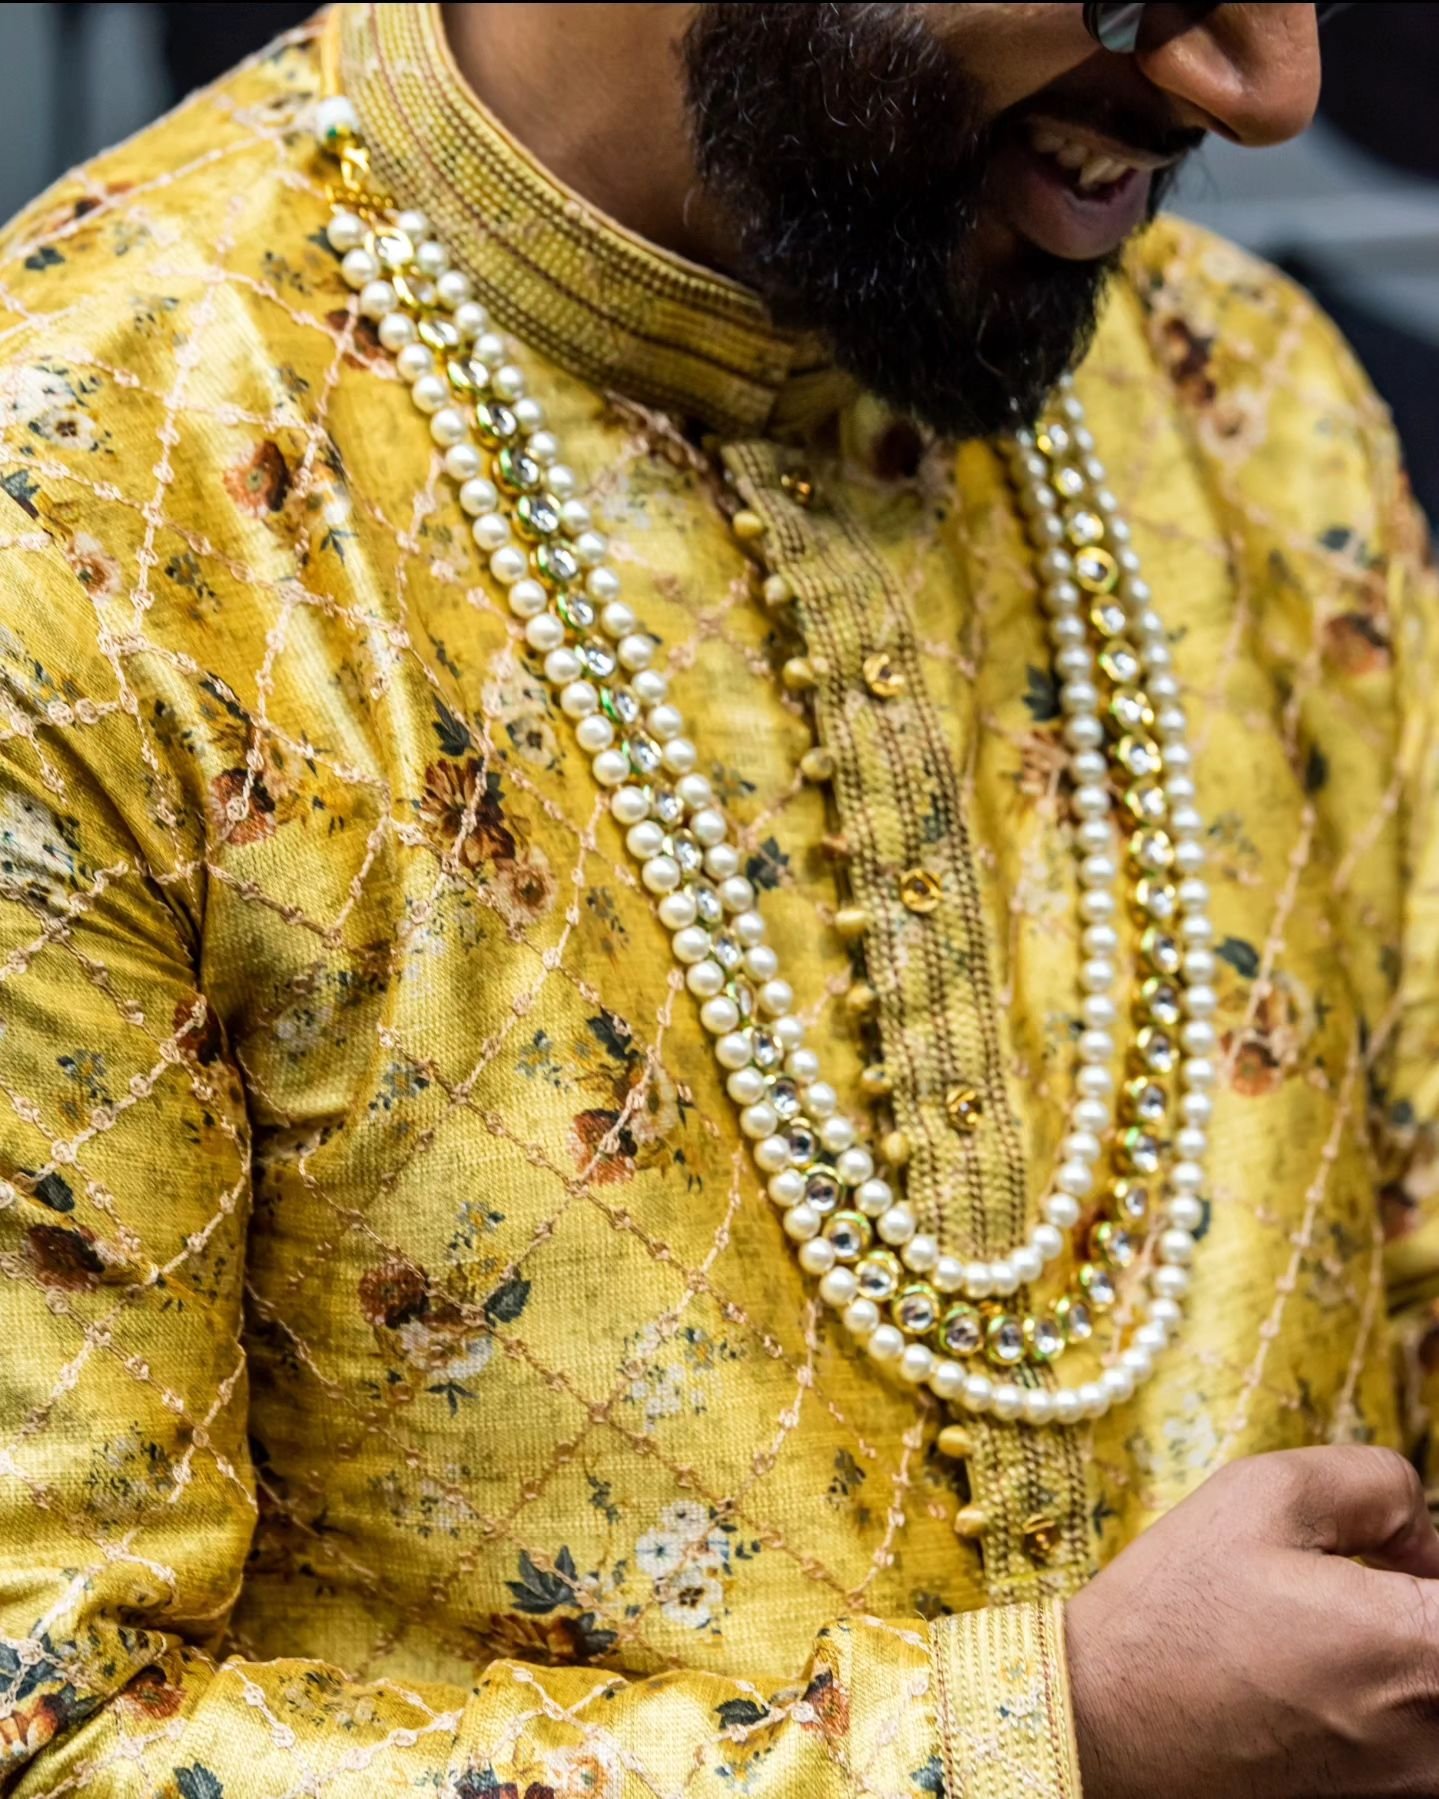 BACK IN STOCK &mdash; Staples from our men's collection are back in stock. Budget friendly, high quality - the perfect addition to any man's accessory line up! 

Pictured is the Branav Kundan Malai ✨️

#menswear #southasianaccessories #southasianmen